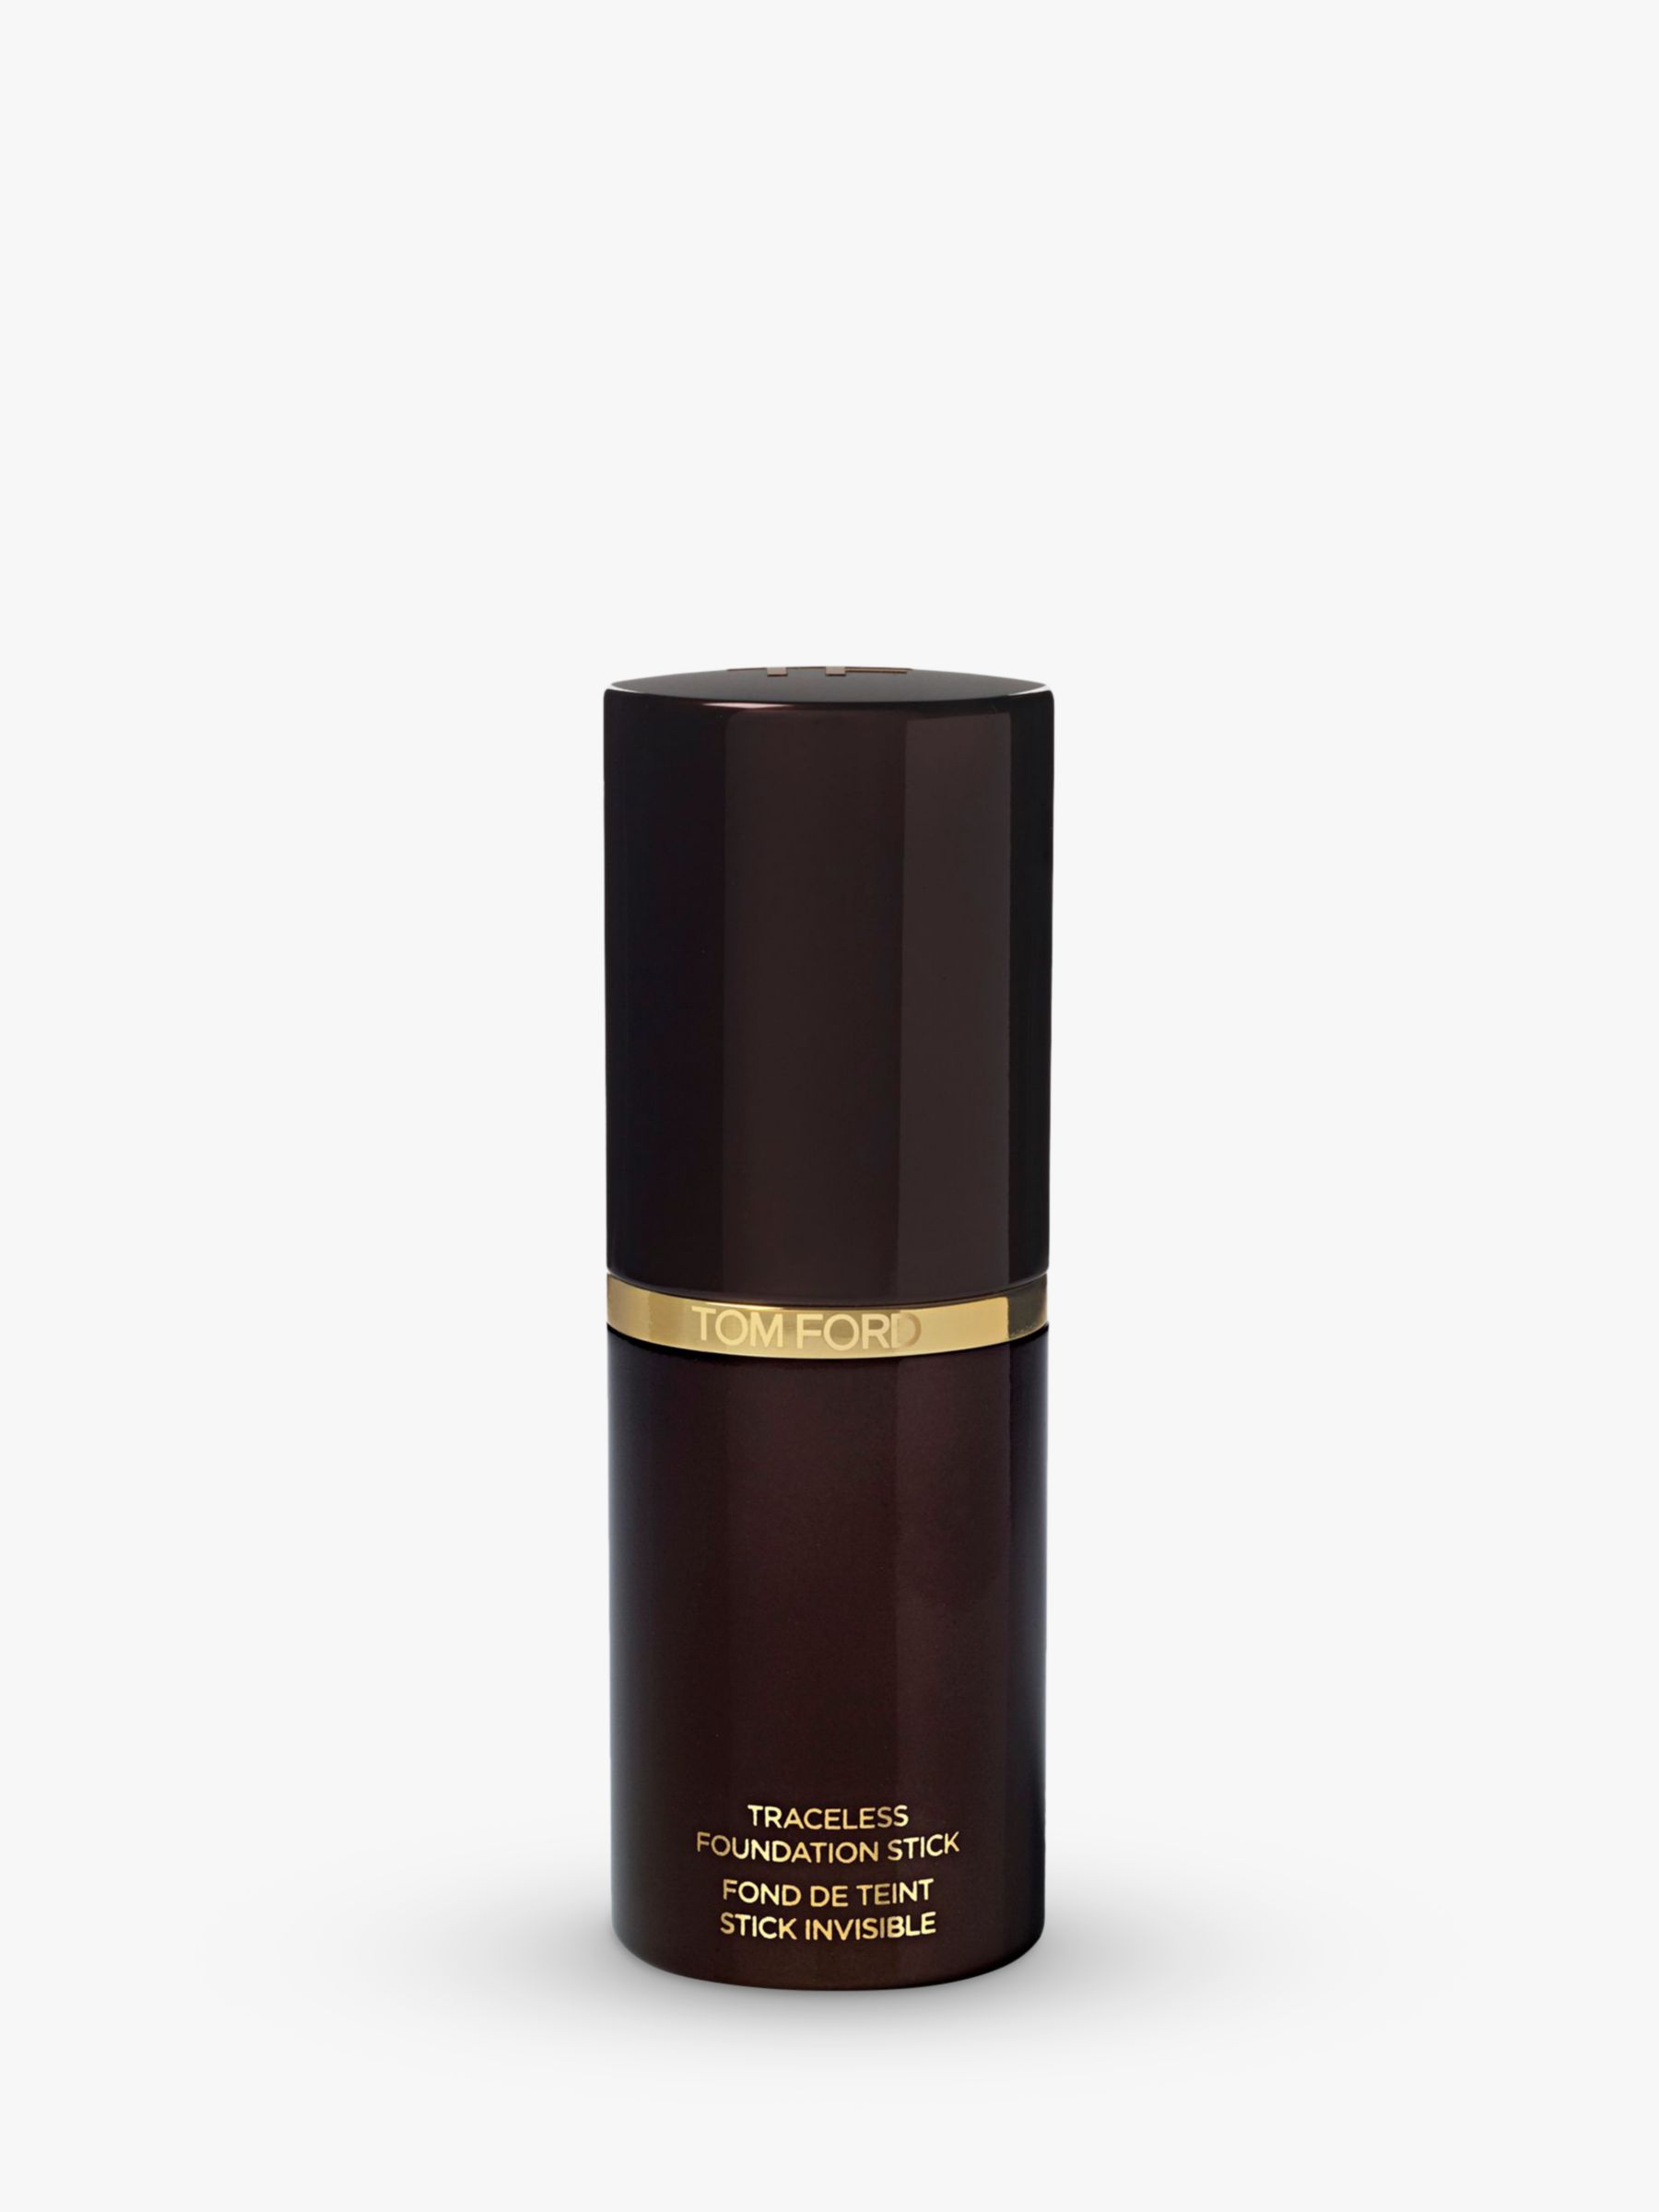 TOM FORD Traceless Foundation Stick, Sable at John Lewis & Partners